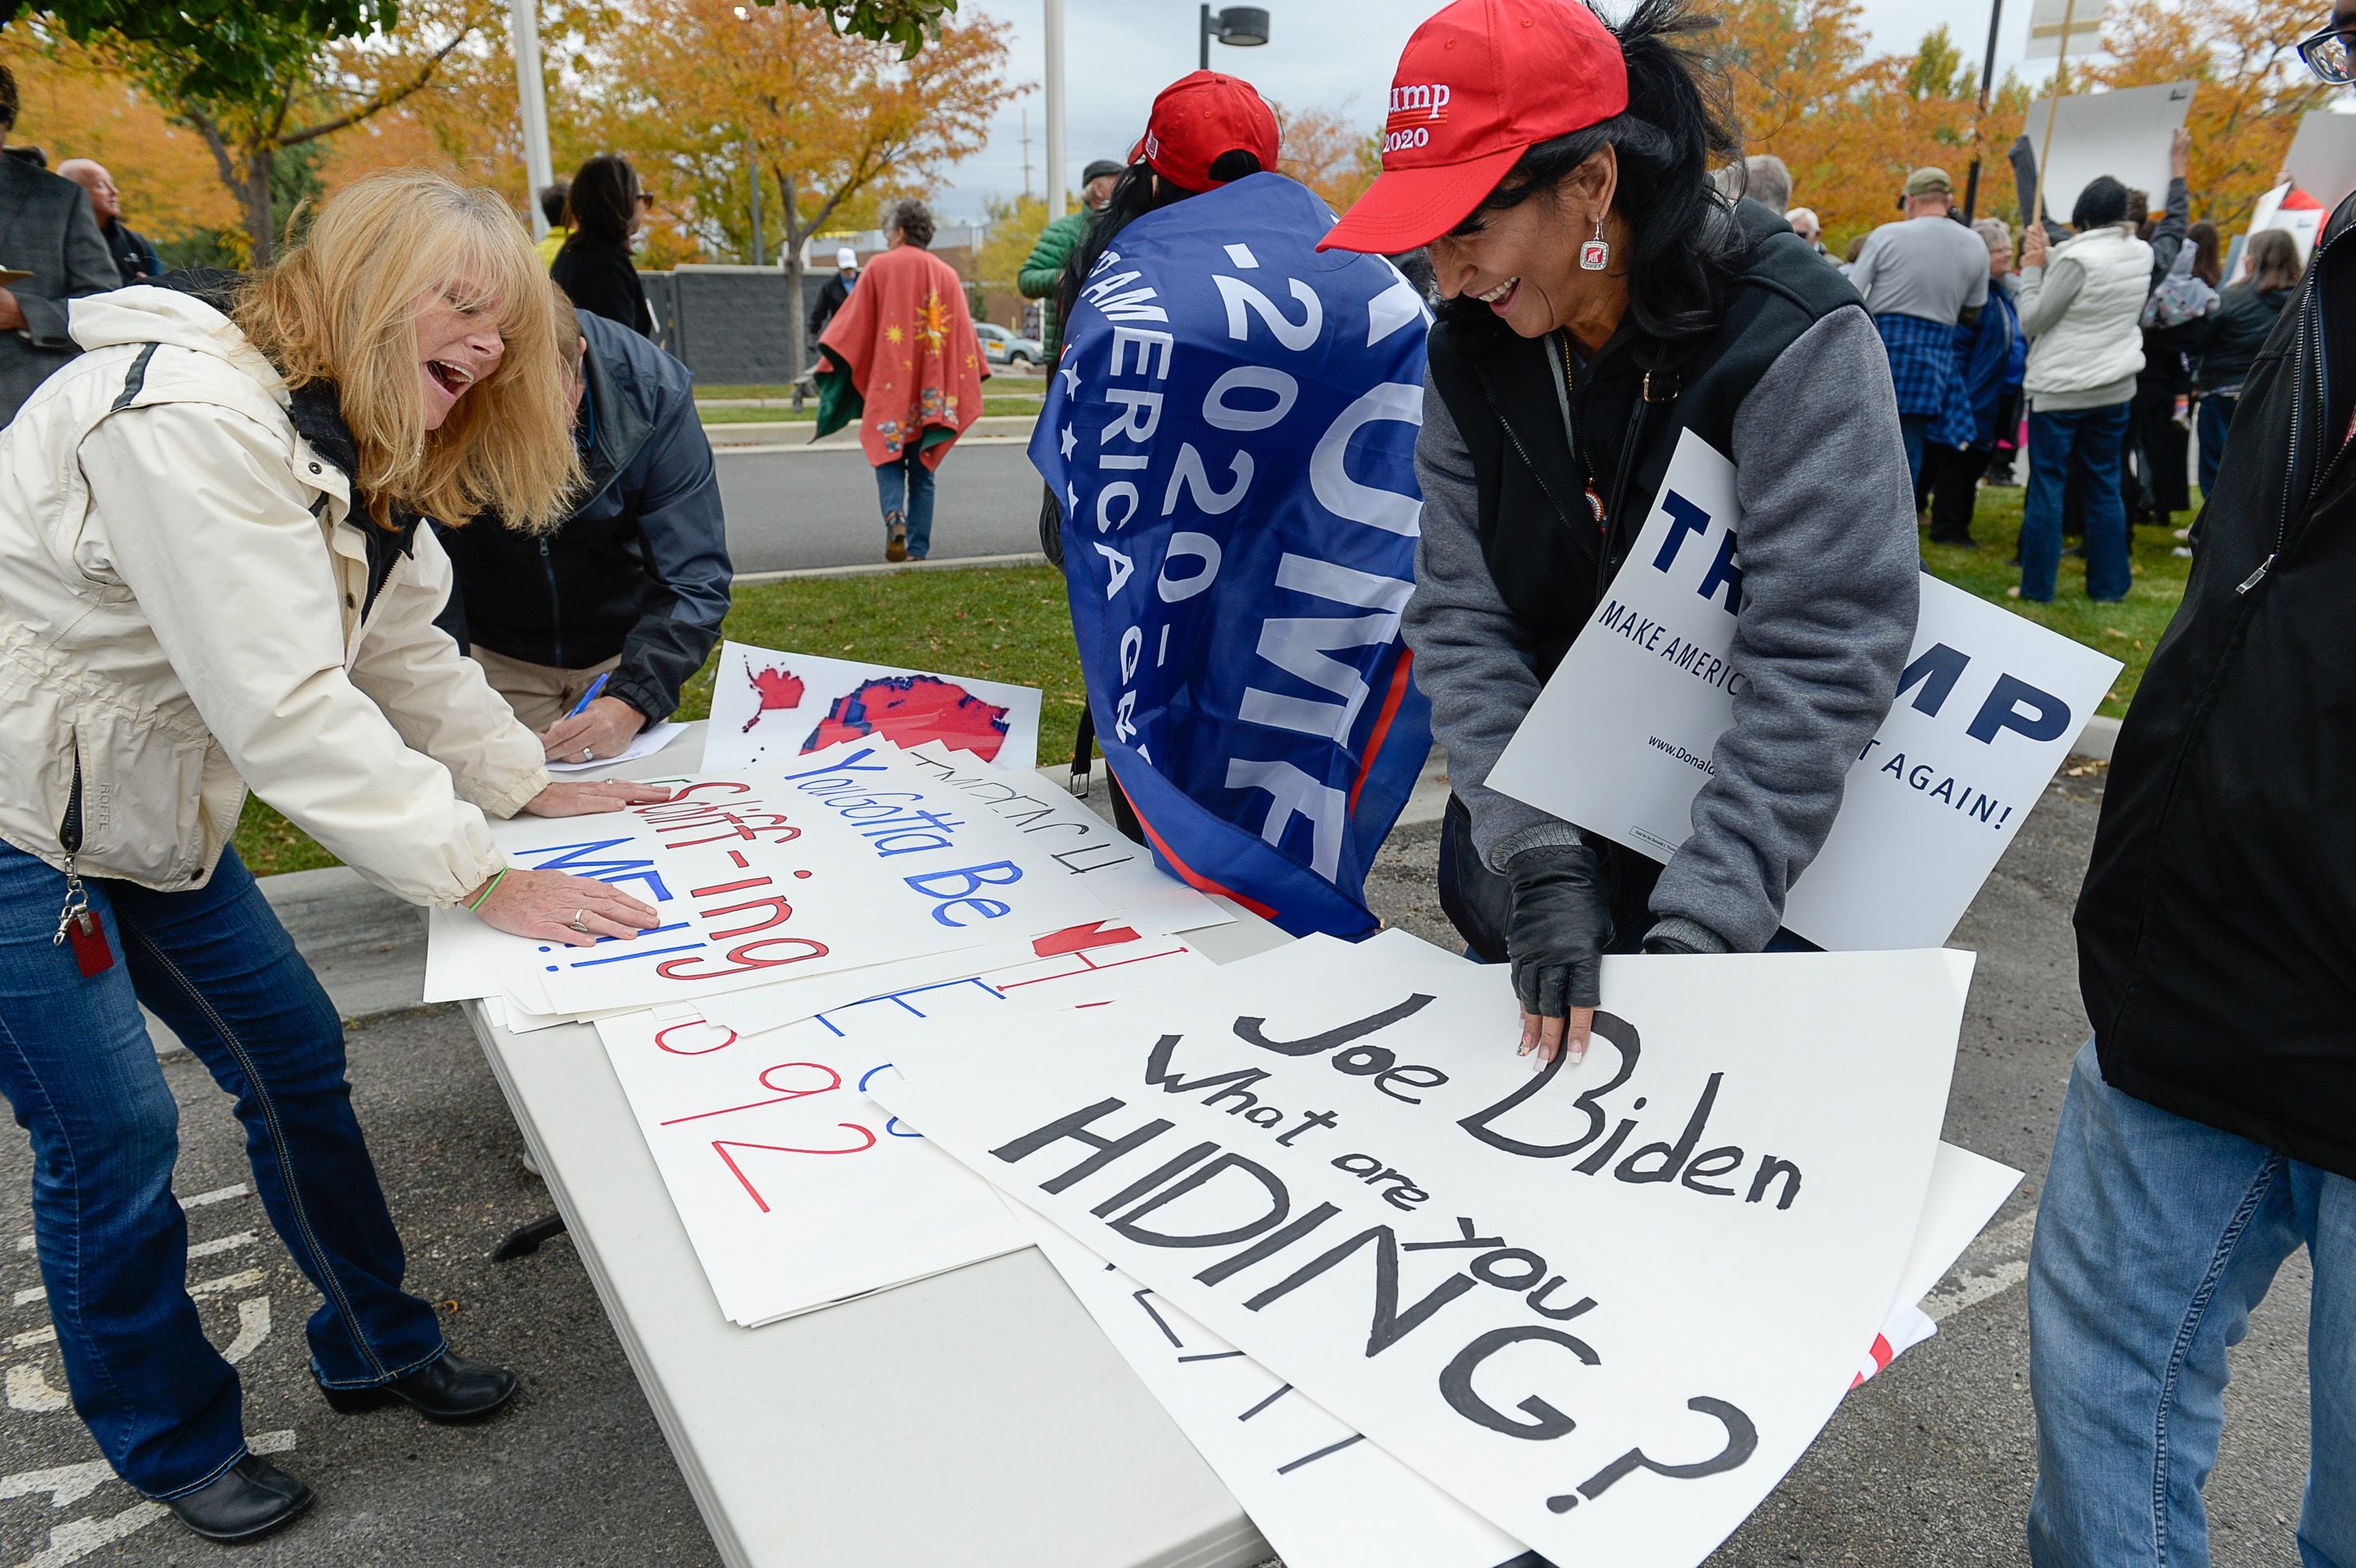 (Francisco Kjolseth | The Salt Lake Tribune) Carolyn Howard, left, and Sylvia Miera-Fisk laugh as they overlook their signage as two competing rallies spar near Rep. Ben McAdams' office in West Jordan, one seeking to support McAdams and one to criticize him for supporting the impeachment inquiry of President Donald Trump on Wednesday, Oct. 9, 2019.